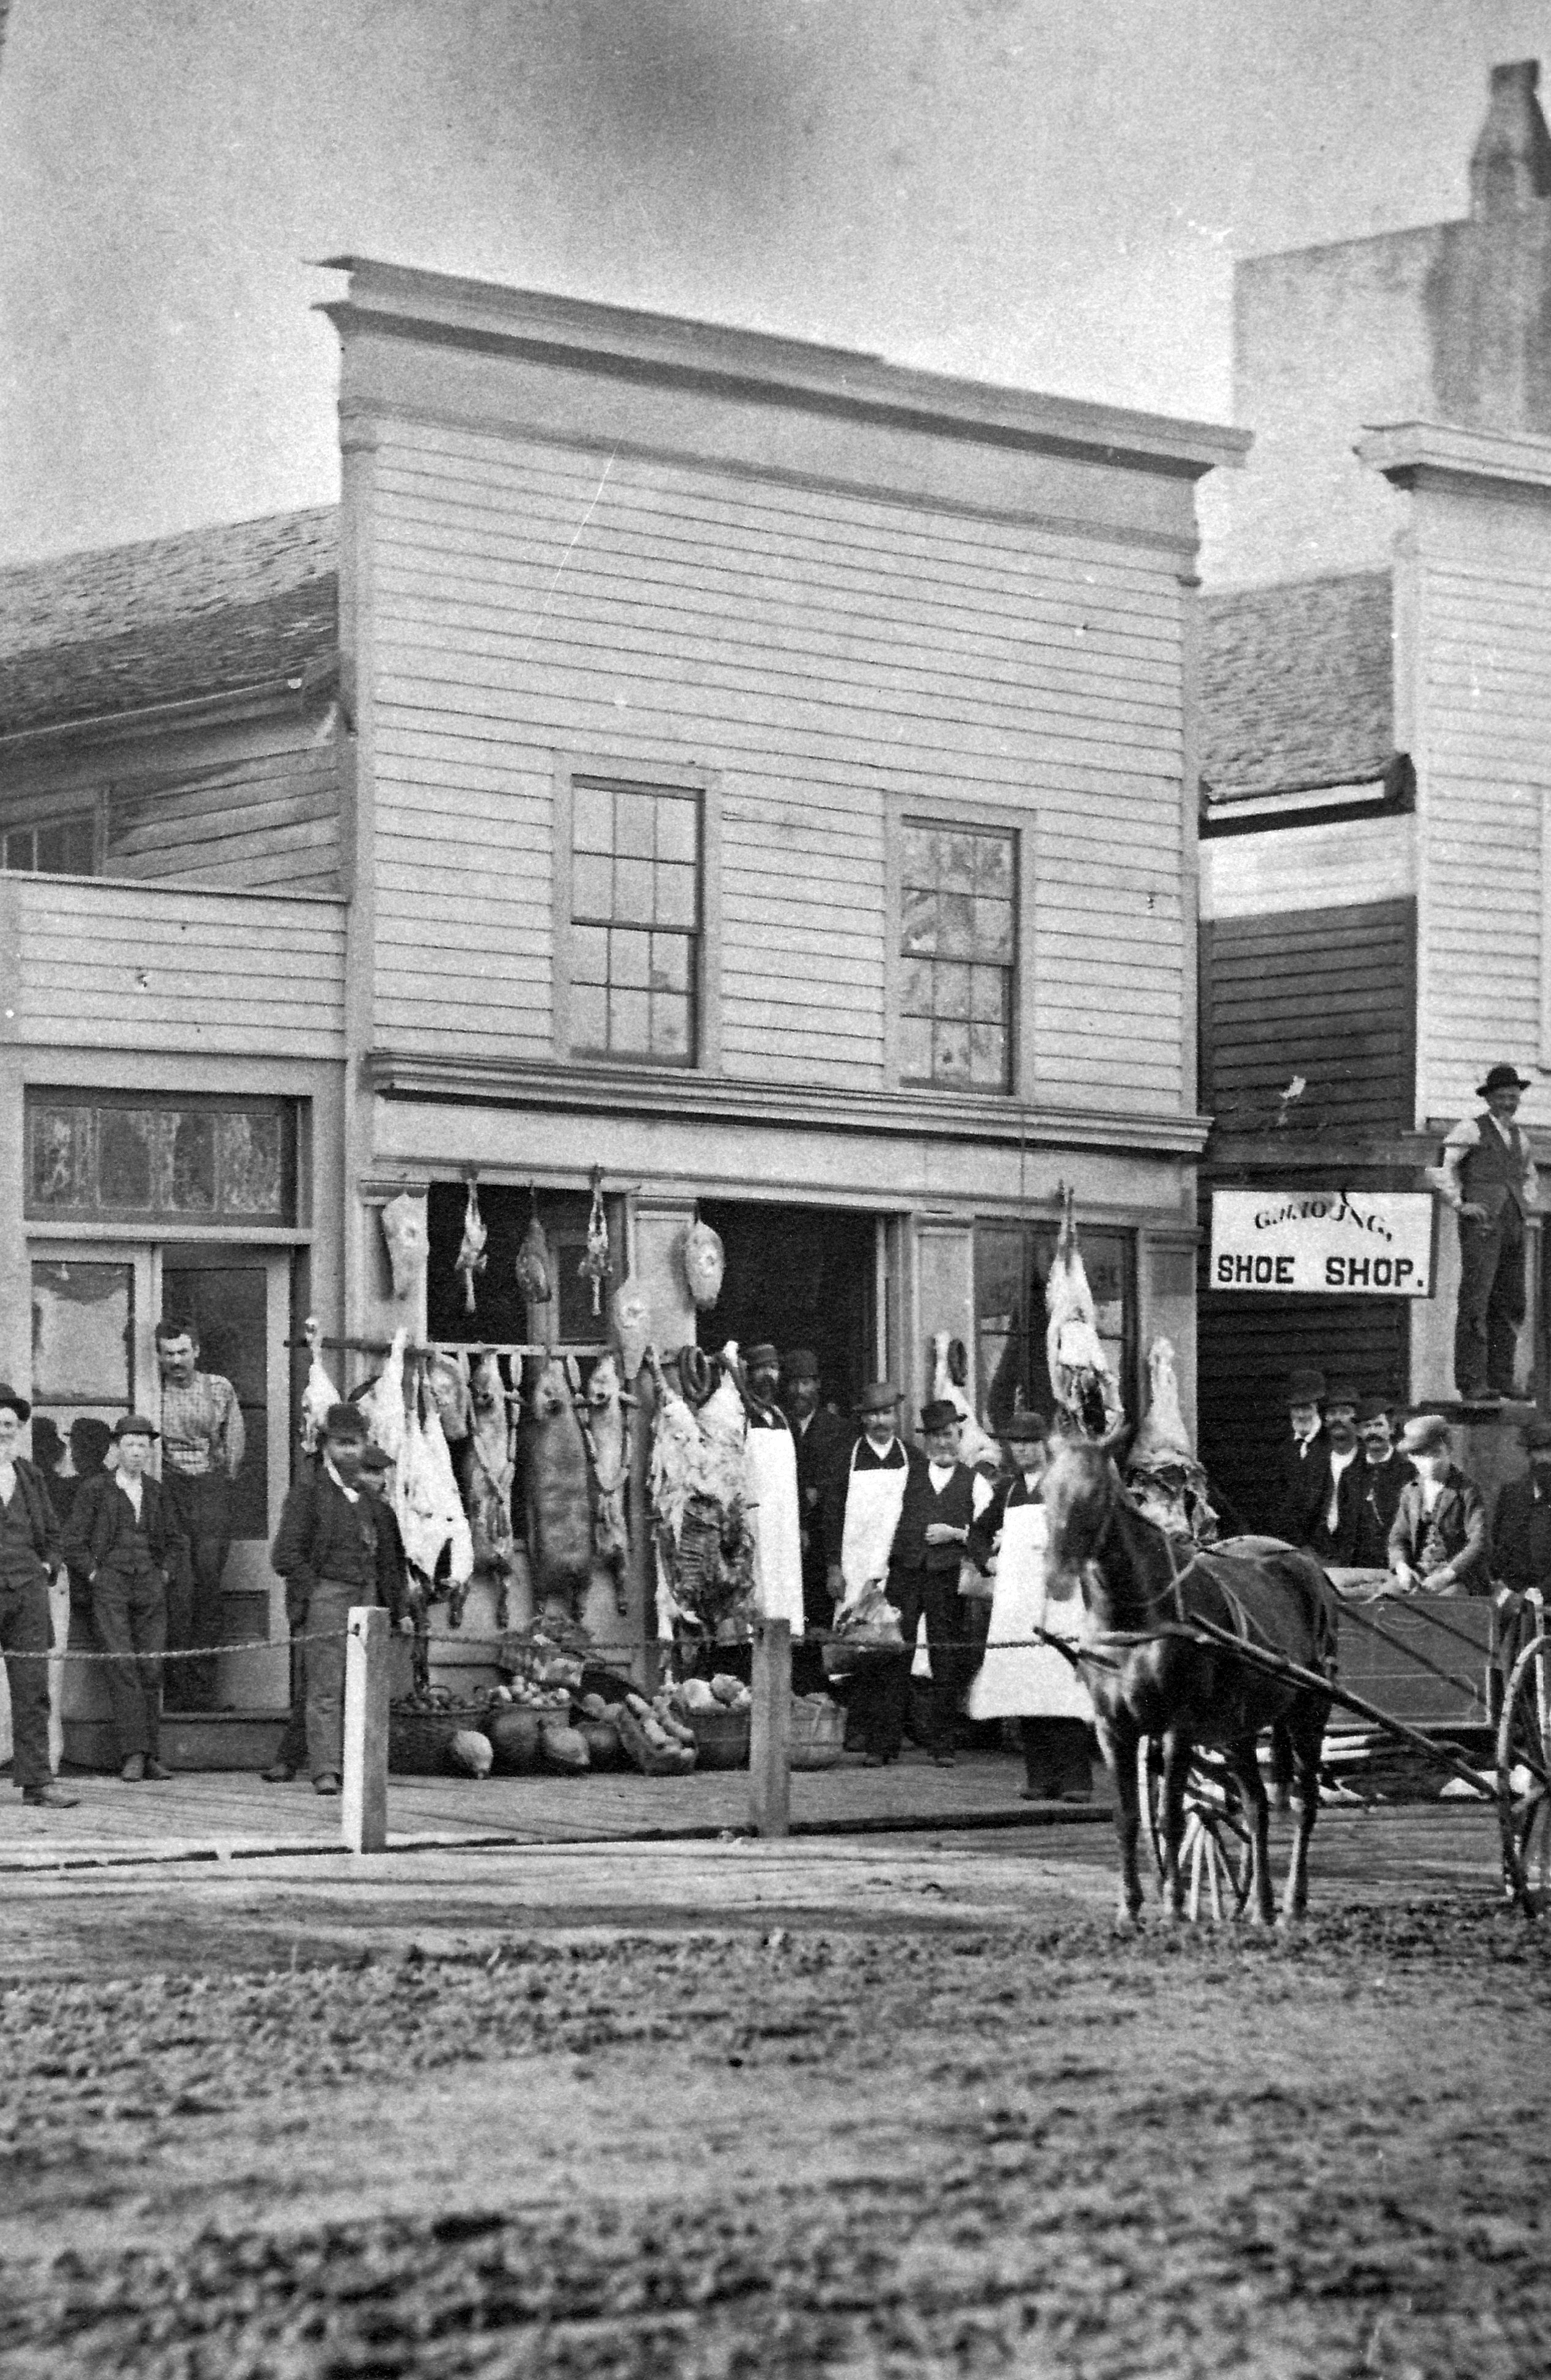 Original meat market that stood on site of Knoblauch’s Market, built by Alfred Whitman April 14, 1856.  This picture taken in 1882 show Andrew Stephenson (donor of South or Stephenson Park), Val Houseman, Charles Chase, Marve Davison, Unknown, William Murfitt (father of Carrie and Ida Murfitt), and Samuel McFarlane, the owners and operators of the market, Elva Plummer, Spencer T. Snow, proprietor of the Morenci Exchange Hotel, Frank Reader, Horatio Wilson, an early settler, Duane Downer, Unknown, Unknown, Freeman Smalley (on the scaffold), Charles McFarlane (in the delivery wagon).